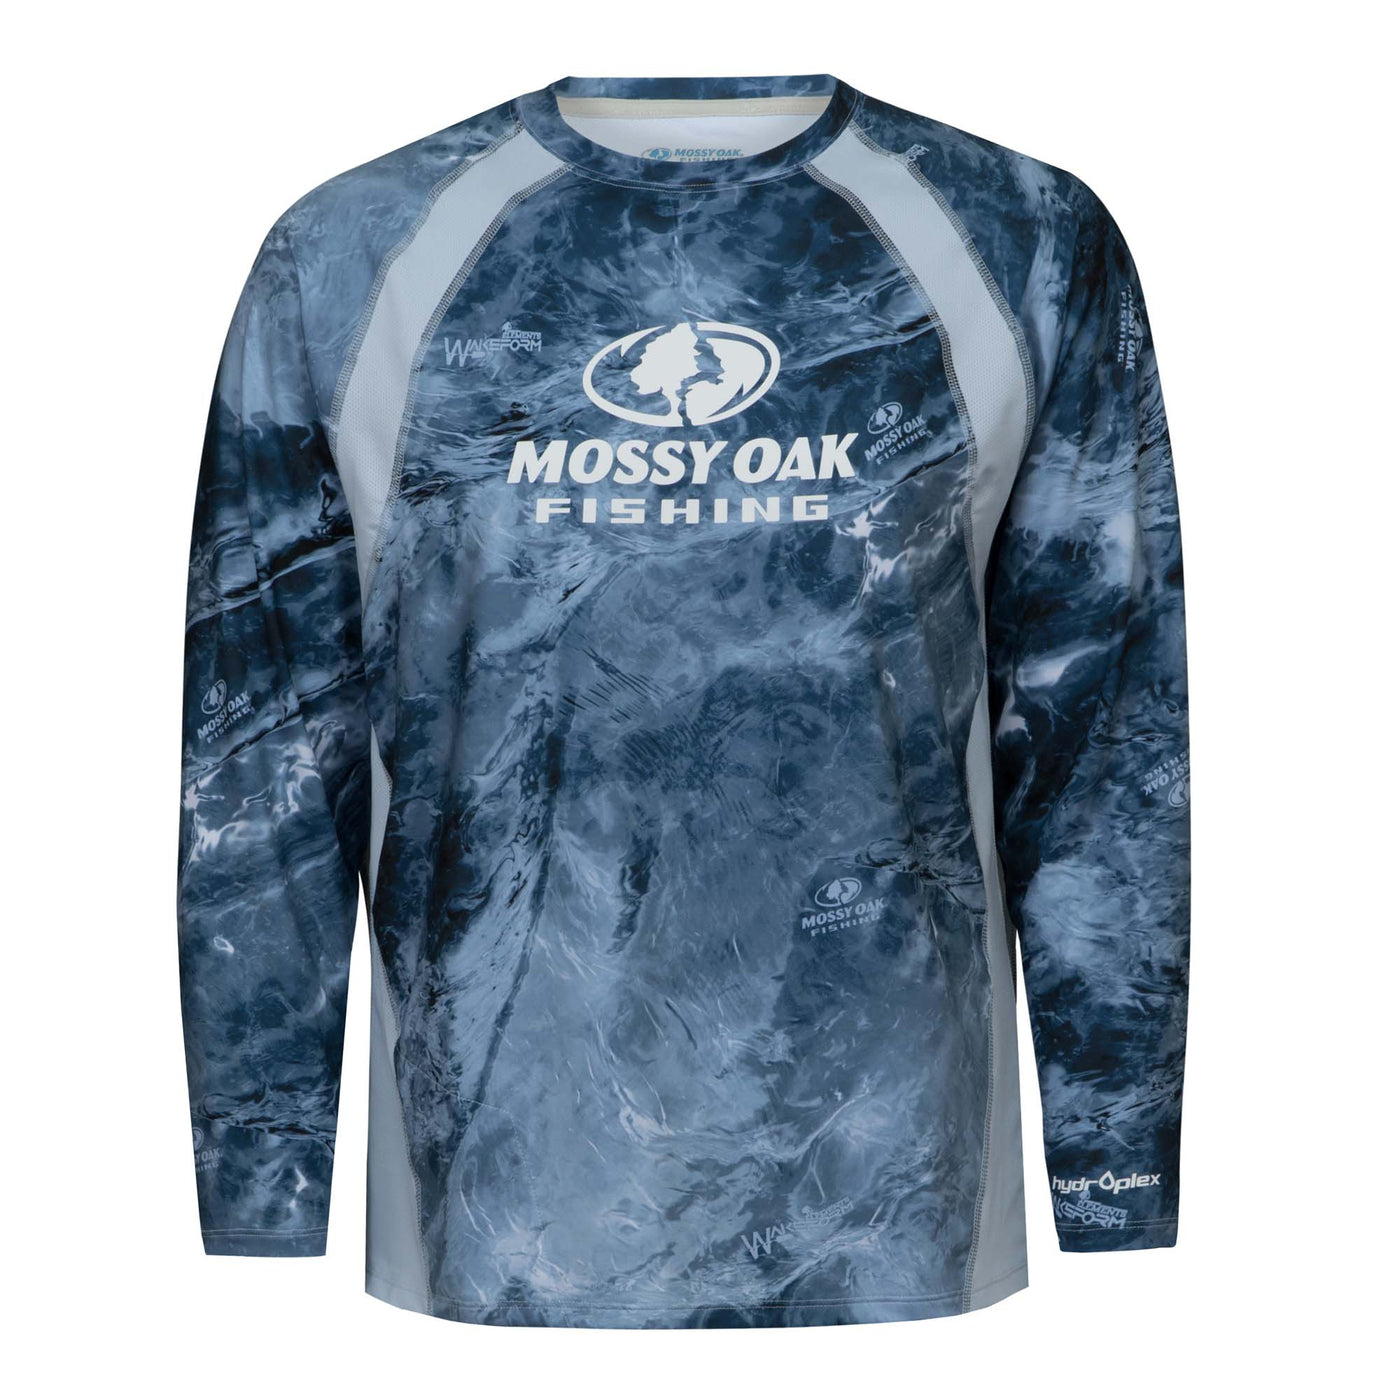 Mossy Oak Mens Patriotic Fishing Shirts for Men Long Sleeve with Sun Protection